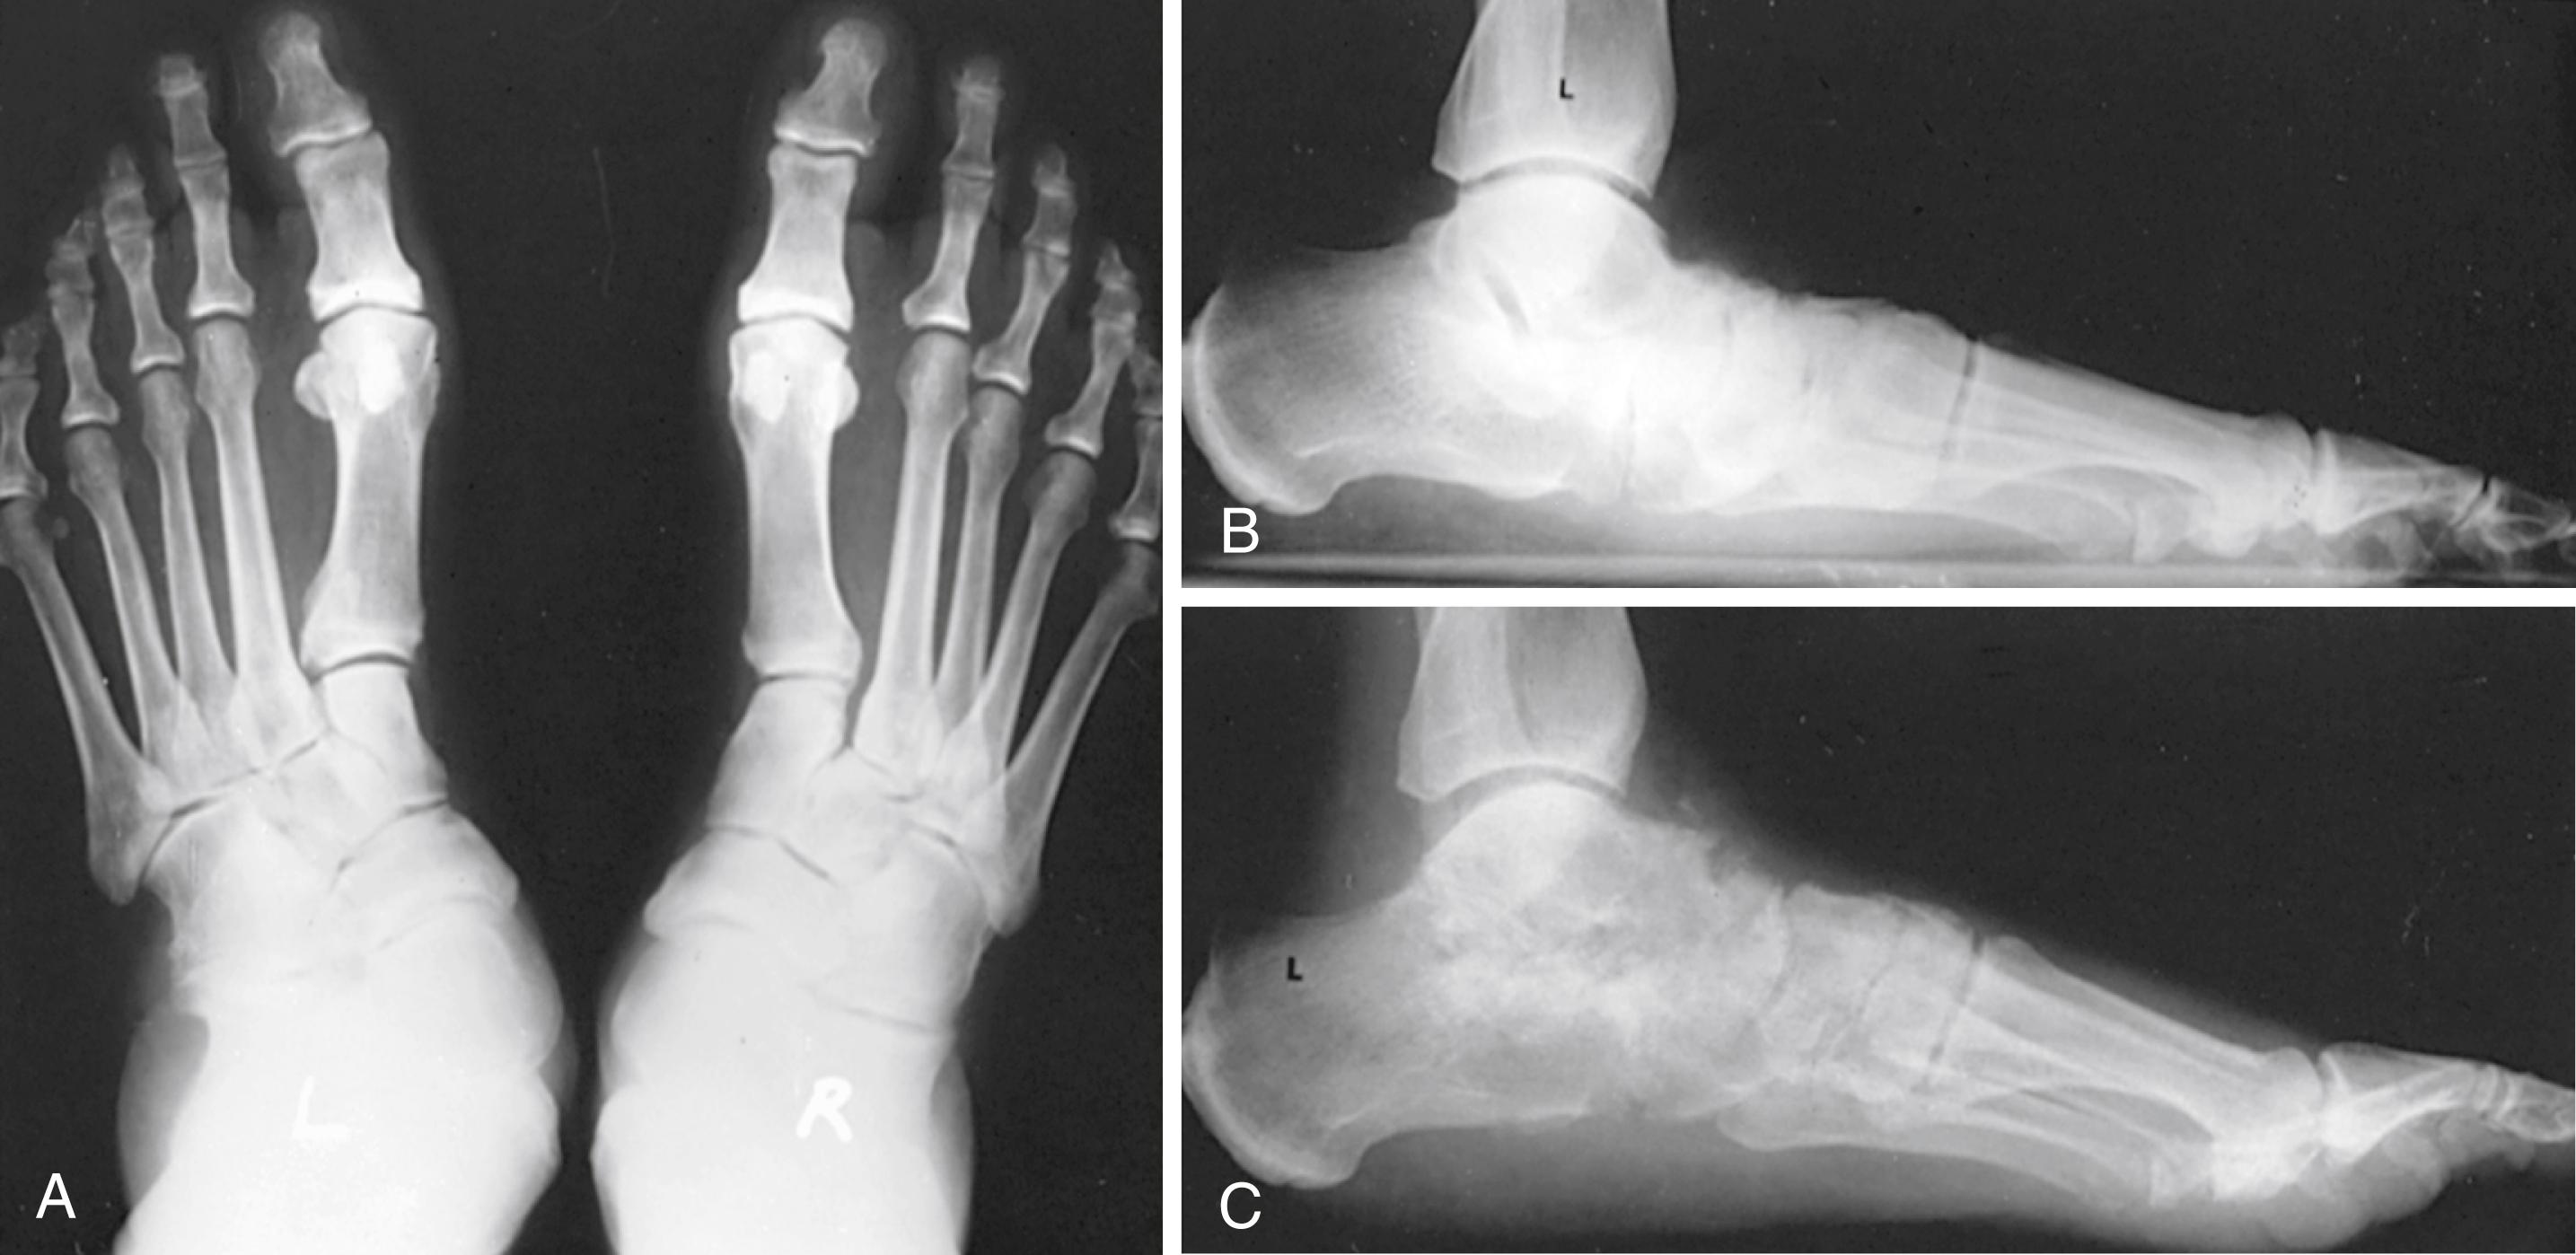 FIGURE 83.10, On anteroposterior view of both feet, note in symptomatic left foot uncovering of talar head as navicular and remaining part of foot move laterally into abduction. Intermetatarsal spaces at their base appear slightly widened; metatarsal-tarsal articulations appear in fact better than in right asymptomatic foot as result of pronation of forefoot. A, Divergence of anteroposterior talocalcaneal angle (Kite angle) is present. B, Standing lateral view shows plantarflexion of talus (head of talus moves plantarward, medially, and distally), loss of normal calcaneal pitch (and concomitant tightening of Achilles tendon), secondary collapse of navicular-cuneiform articular surfaces, and overlapping of medial four metatarsals from pronation of forefoot in weight-bearing position. This patient had traumatic rupture of posterior tibial tendon many years previously while engaging in sports. C, Traumatic arthritic changes followed, and eventually triple arthrodesis was required.